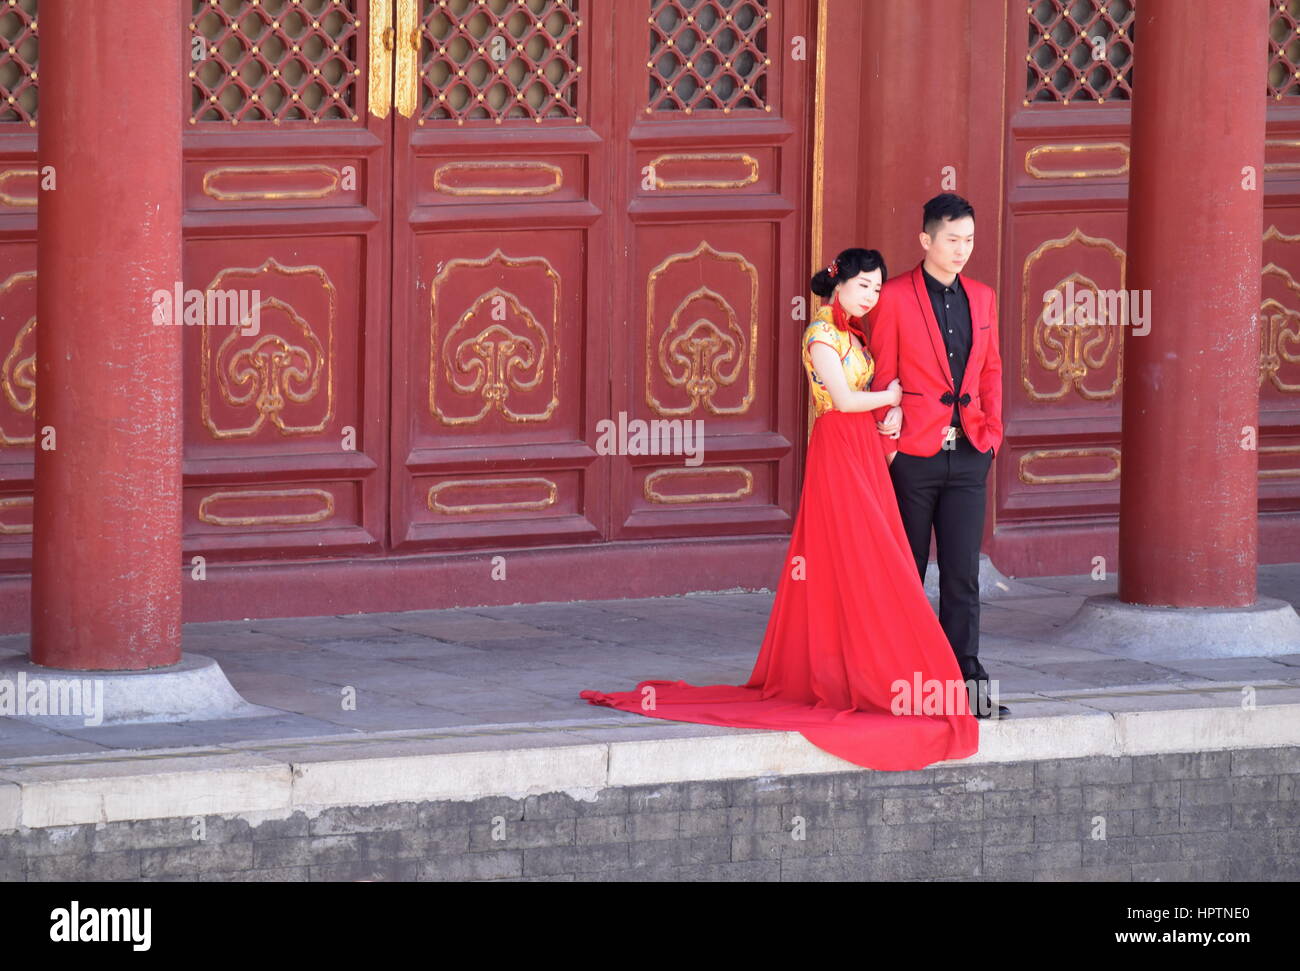 A Chinese couple in love take wedding photos at the Temple of Heaven, wearing red and surrounded by red traditional architecture - Beijing, China Stock Photo